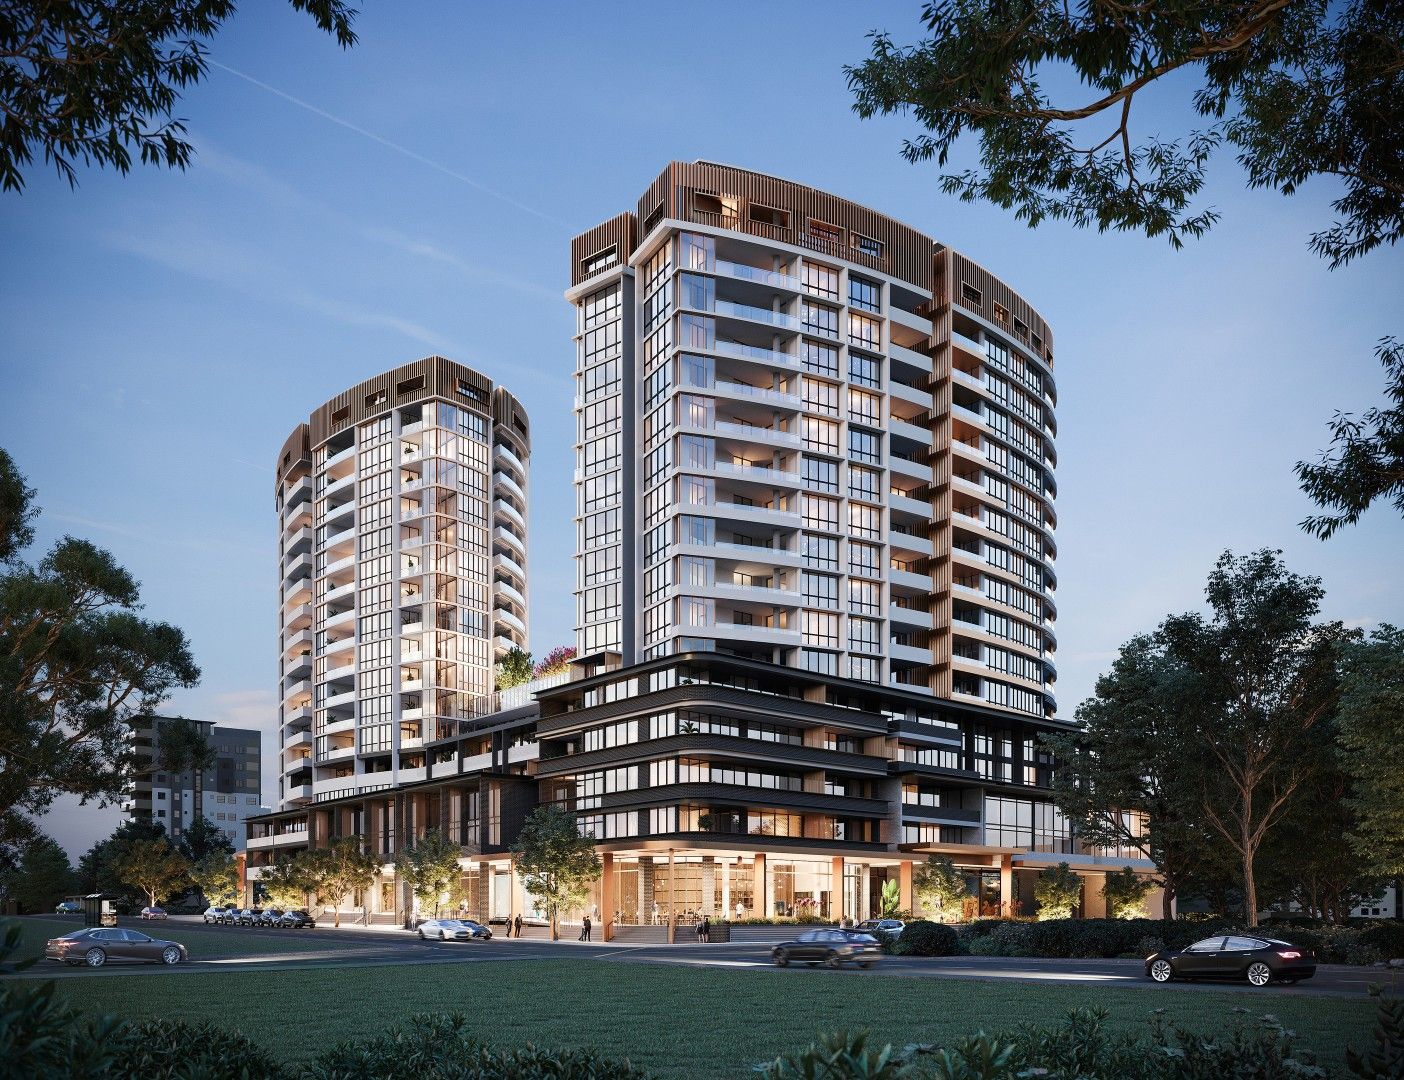 2 bedrooms New Apartments / Off the Plan in 45 Atchison Street WOLLONGONG NSW, 2500